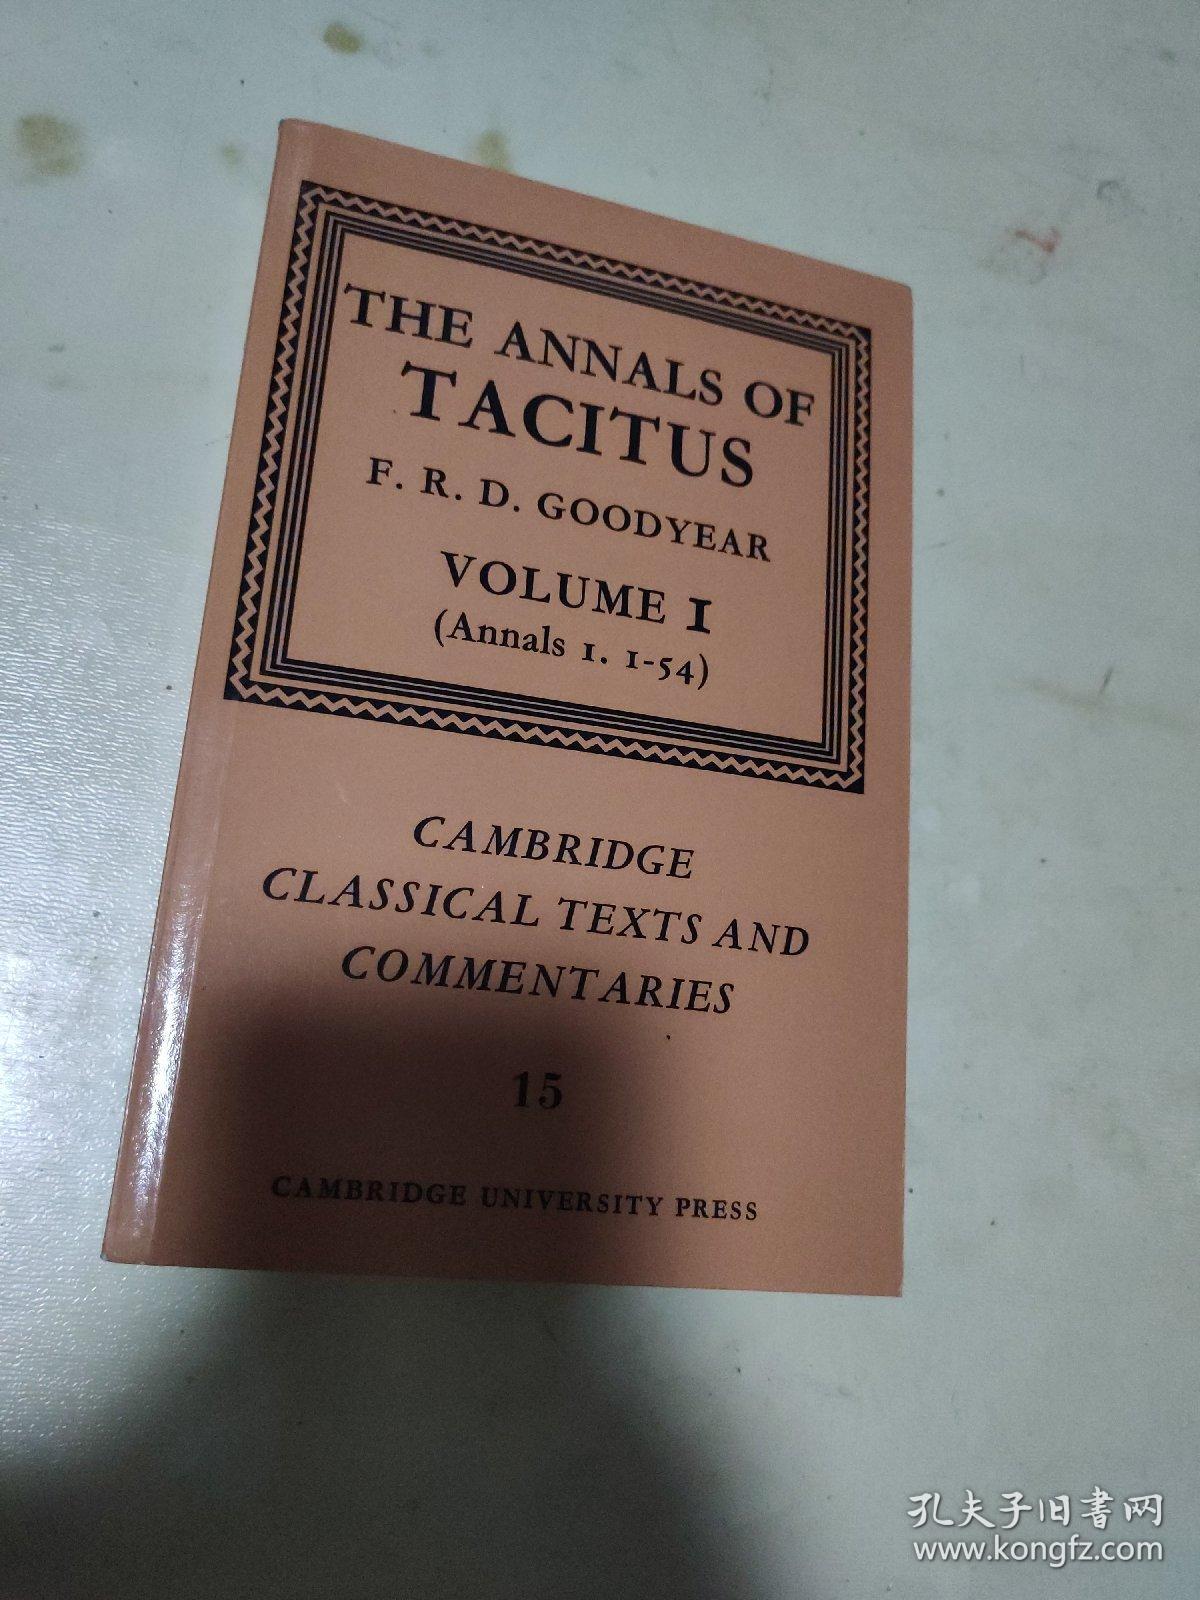 The Annals of Tacitus : Volume 1, Annals 1.1-54 (Cambridge Classical Texts and Commentar